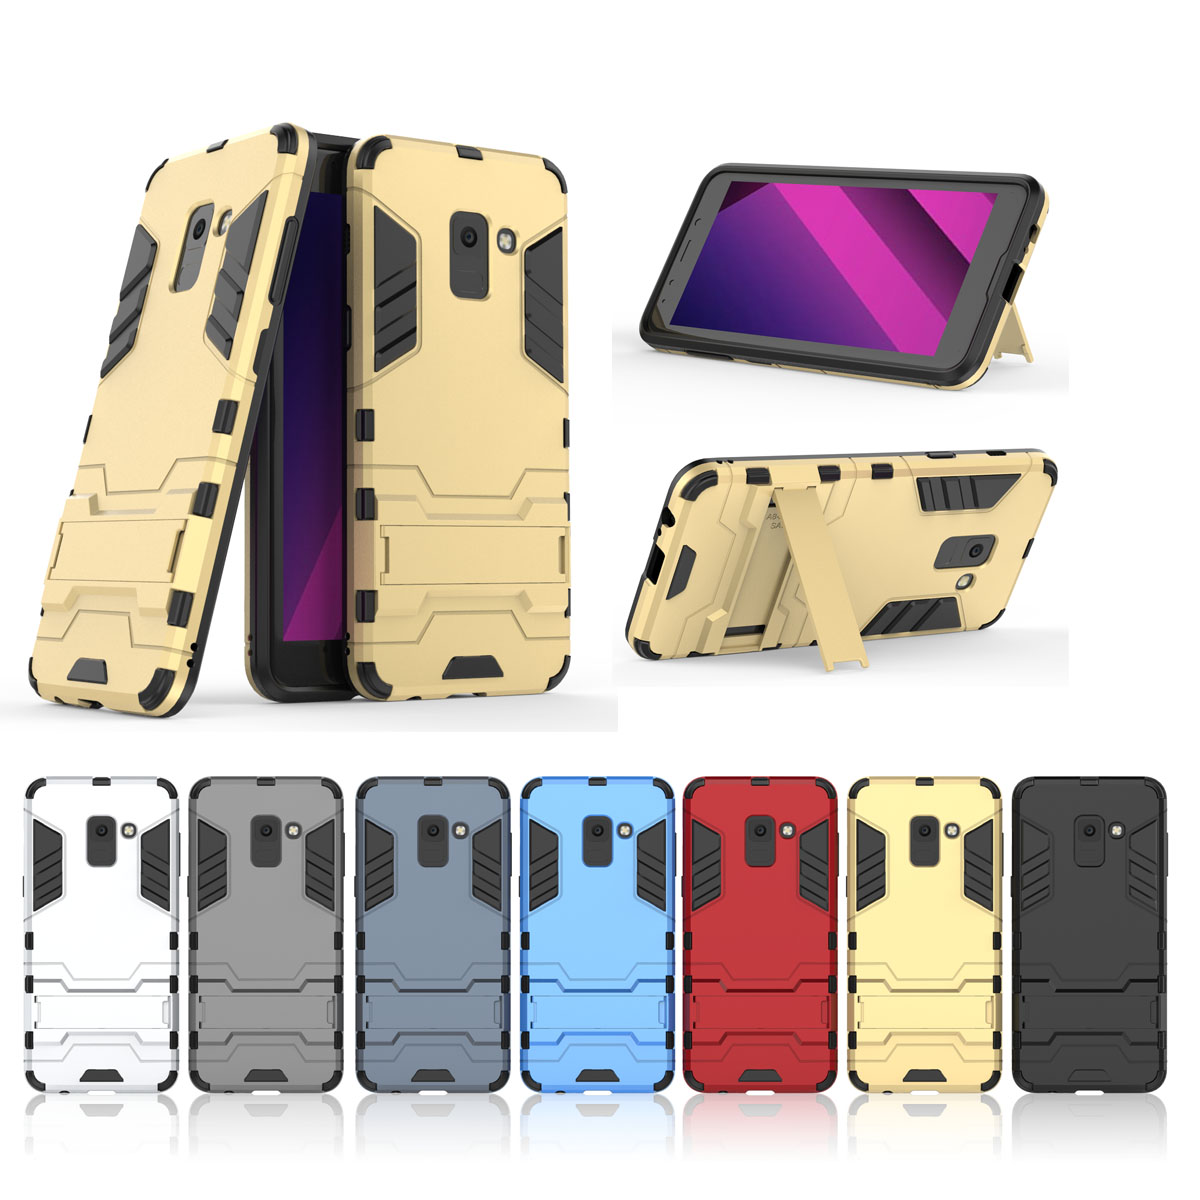 Bakeey-2-in-1-Armor-Kickstand-Hard-PC-Protective-Case-for-Samsung-Galaxy-A8-Plus-2018-1297009-1